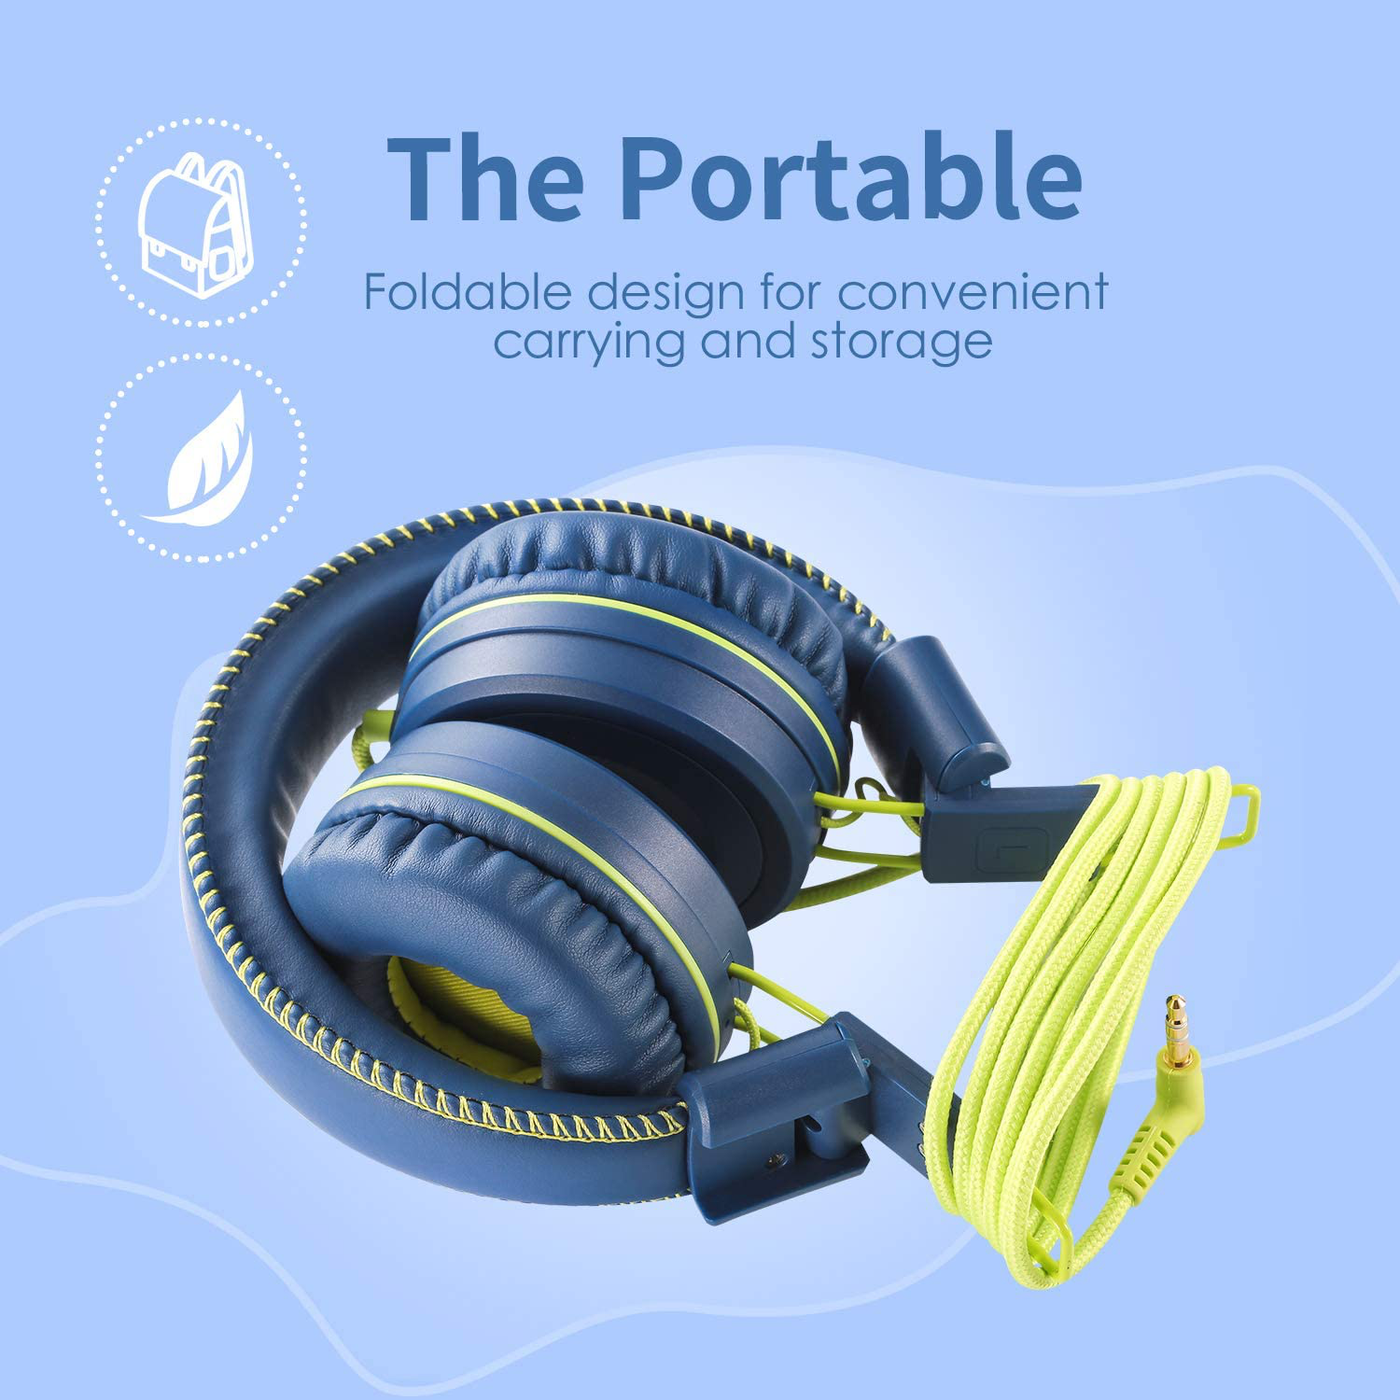 Kids Headphones Wired Headphone for Kids,Foldable Adjustable Stereo Tangle-Free,3.5MM Jack Wire Cord On-Ear Headphone for Children